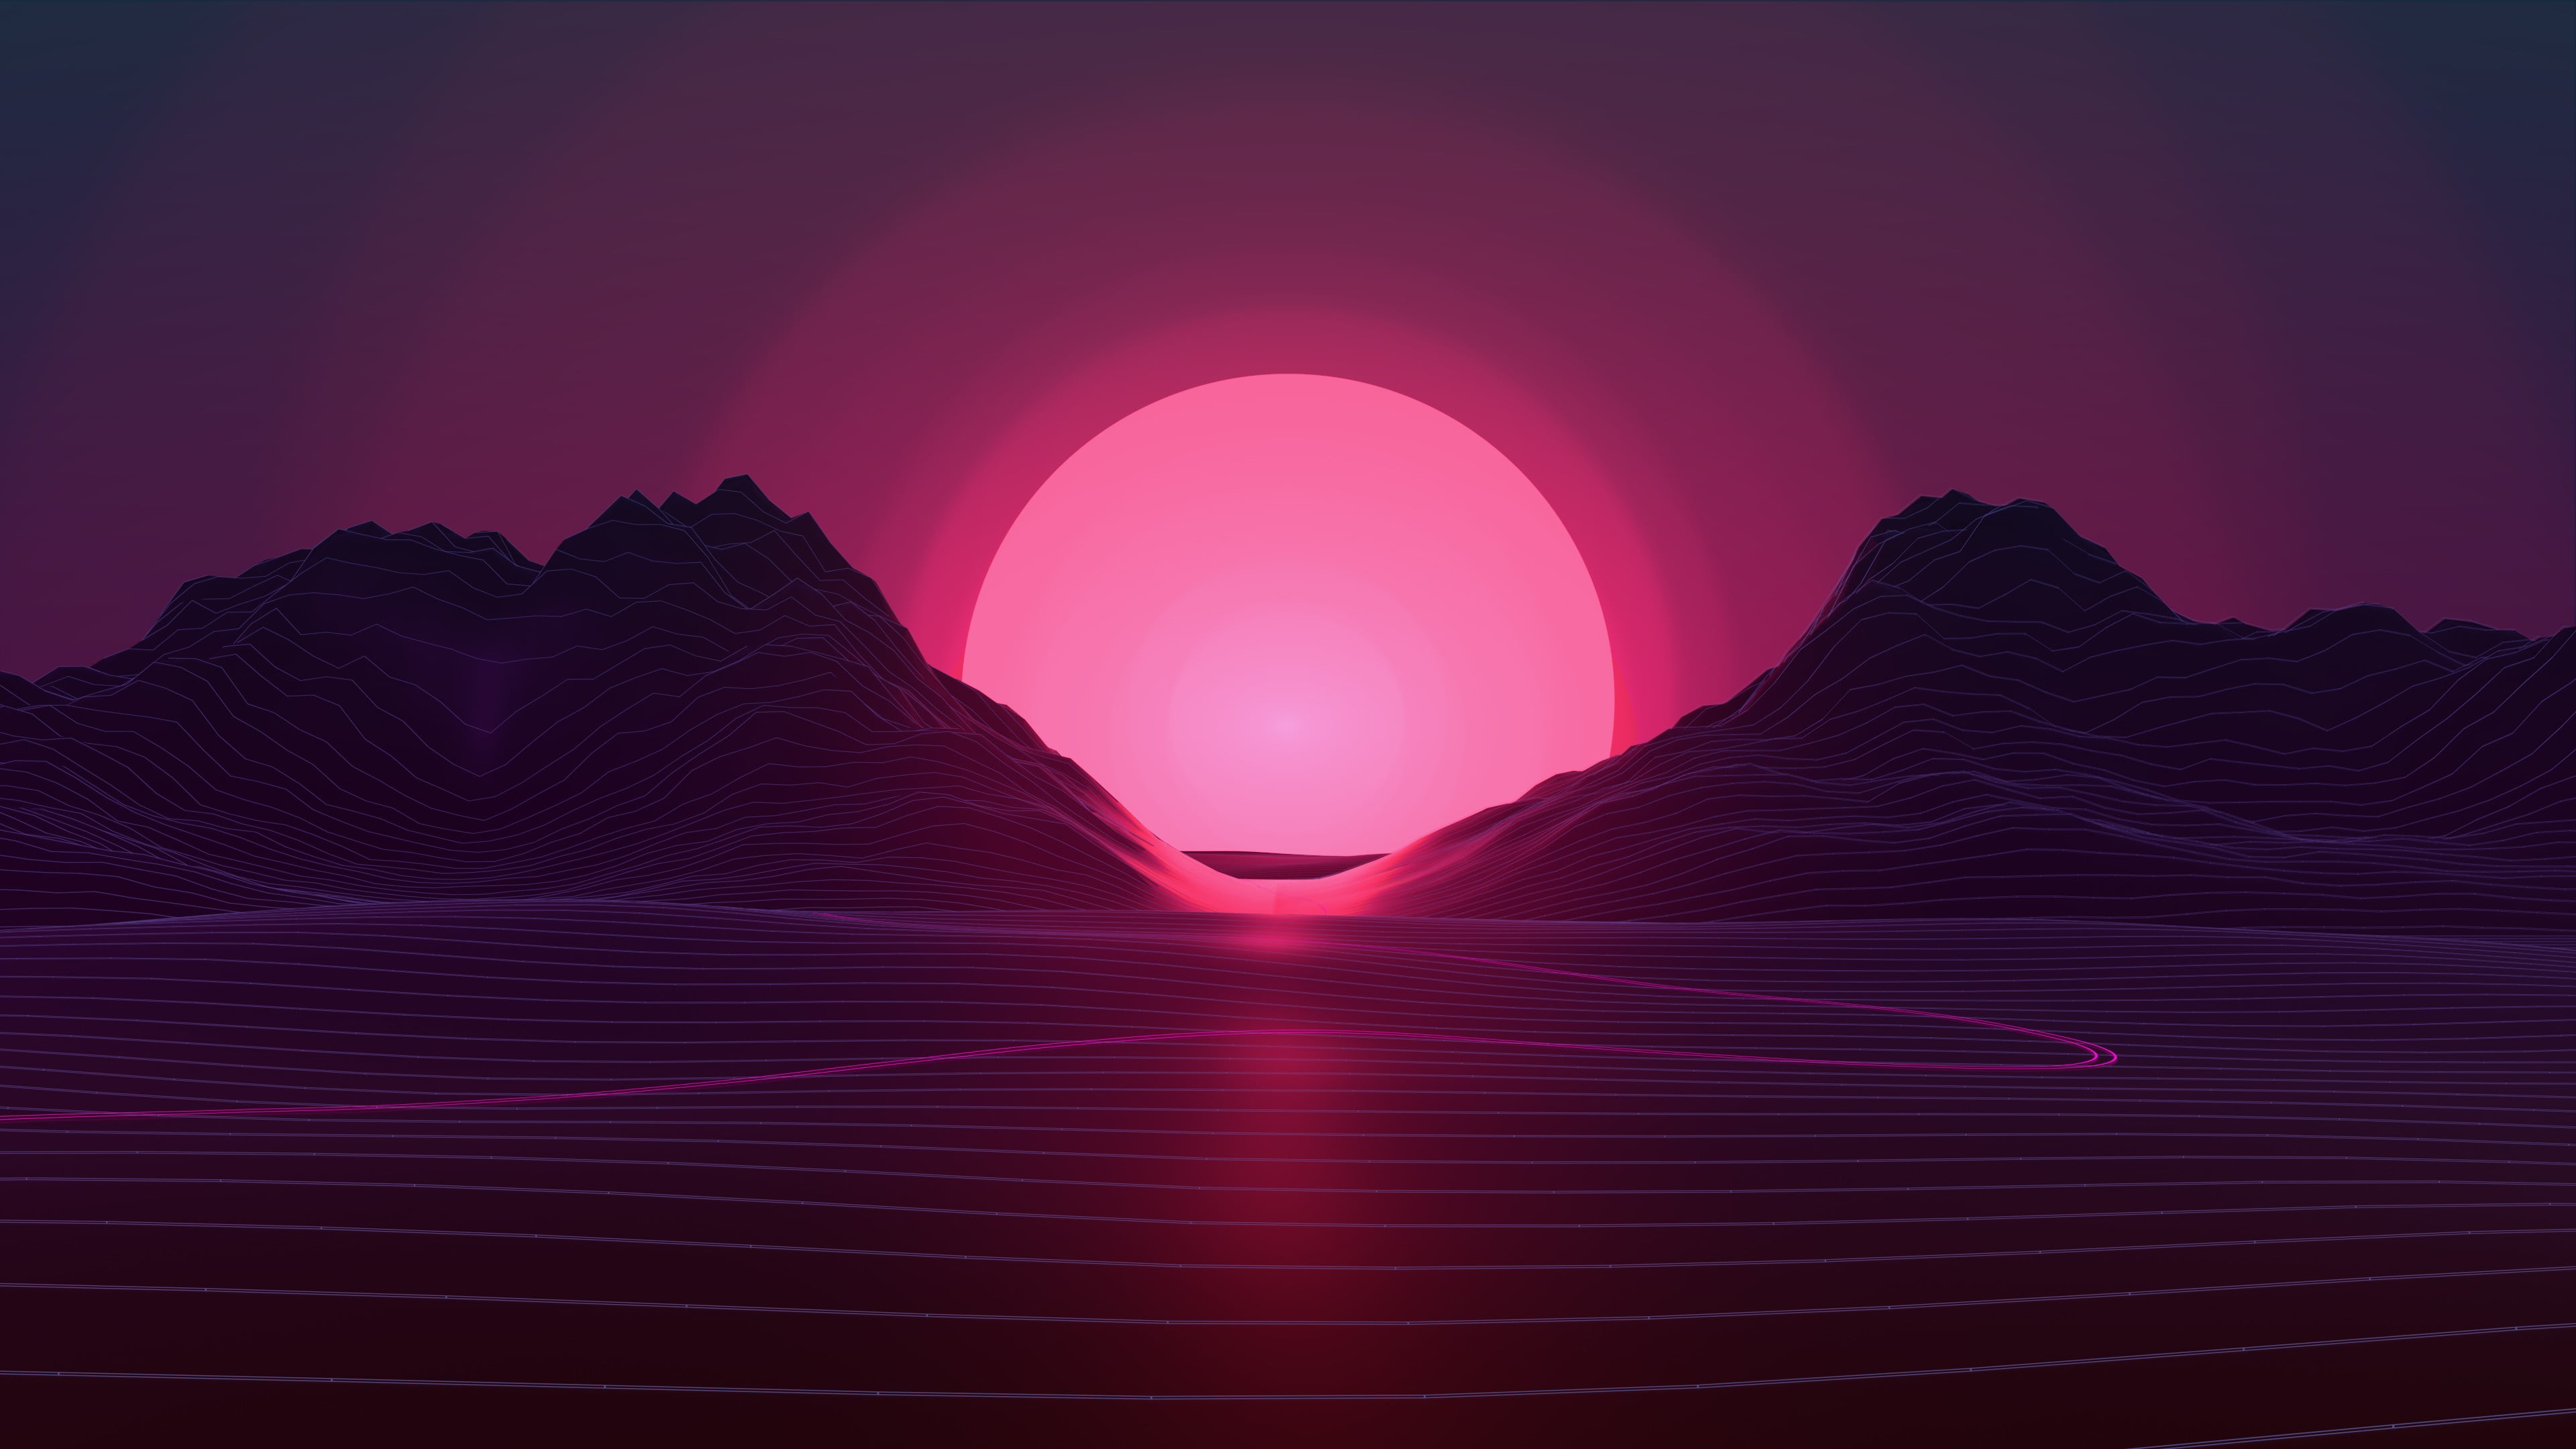 mountain and sun wallpaper, mountain with background of sunrise digital wallpaper